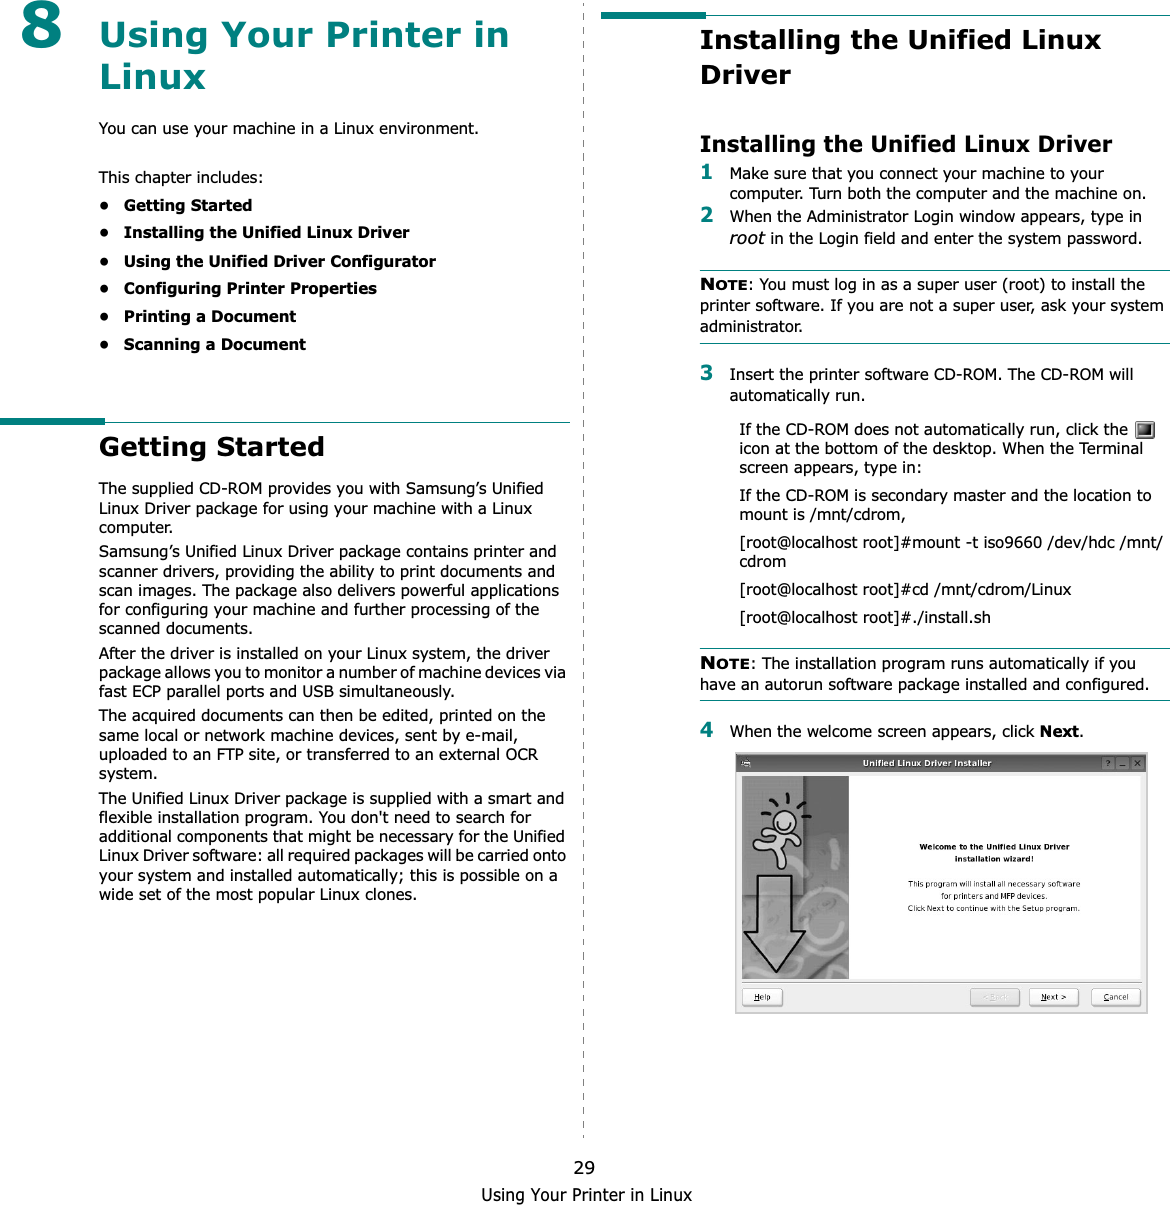 Using Your Printer in Linux298Using Your Printer in LinuxYou can use your machine in a Linux environment. This chapter includes:• Getting Started• Installing the Unified Linux Driver• Using the Unified Driver Configurator• Configuring Printer Properties• Printing a Document• Scanning a DocumentGetting StartedThe supplied CD-ROM provides you with Samsung’s Unified Linux Driver package for using your machine with a Linux computer.Samsung’s Unified Linux Driver package contains printer and scanner drivers, providing the ability to print documents and scan images. The package also delivers powerful applications for configuring your machine and further processing of the scanned documents.After the driver is installed on your Linux system, the driver package allows you to monitor a number of machine devices via fast ECP parallel ports and USB simultaneously. The acquired documents can then be edited, printed on the same local or network machine devices, sent by e-mail, uploaded to an FTP site, or transferred to an external OCR system.The Unified Linux Driver package is supplied with a smart and flexible installation program. You don&apos;t need to search for additional components that might be necessary for the Unified Linux Driver software: all required packages will be carried onto your system and installed automatically; this is possible on a wide set of the most popular Linux clones.Installing the Unified Linux DriverInstalling the Unified Linux Driver1Make sure that you connect your machine to your computer. Turn both the computer and the machine on.2When the Administrator Login window appears, type in root in the Login field and enter the system password.NOTE: You must log in as a super user (root) to install the printer software. If you are not a super user, ask your system administrator.3Insert the printer software CD-ROM. The CD-ROM will automatically run.If the CD-ROM does not automatically run, click the   icon at the bottom of the desktop. When the Terminal screen appears, type in:If the CD-ROM is secondary master and the location to mount is /mnt/cdrom,[root@localhost root]#mount -t iso9660 /dev/hdc /mnt/cdrom[root@localhost root]#cd /mnt/cdrom/Linux[root@localhost root]#./install.sh NOTE: The installation program runs automatically if you have an autorun software package installed and configured.4When the welcome screen appears, click Next.